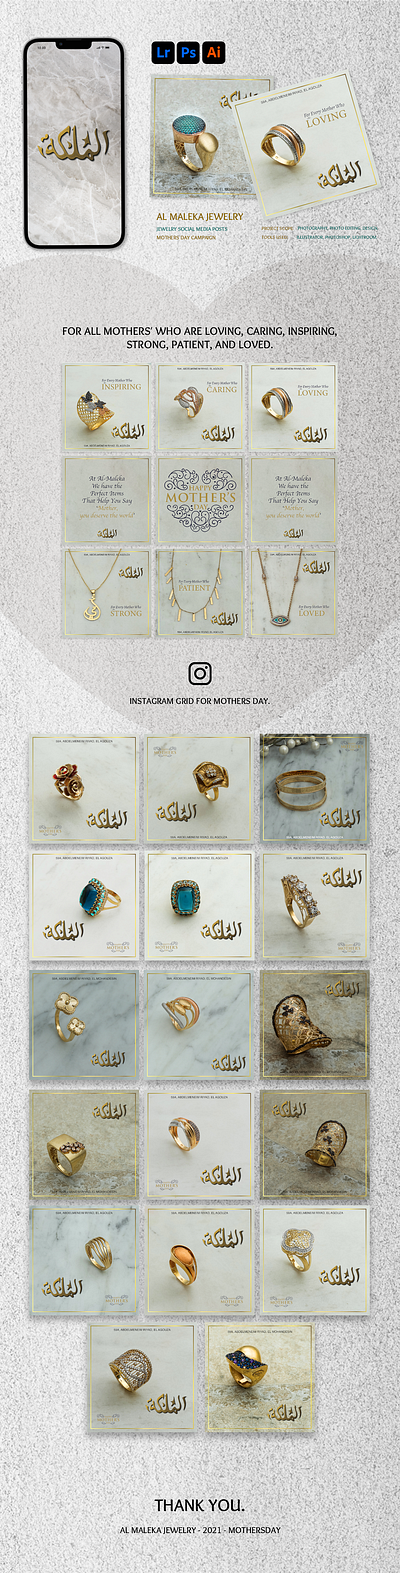 AL MALEKA JEWELRY MOTHERS DAY 2021 SOCIAL MEDIA POSTS color adjustment color correction graphic design jewelry photography photography product photography social media posts